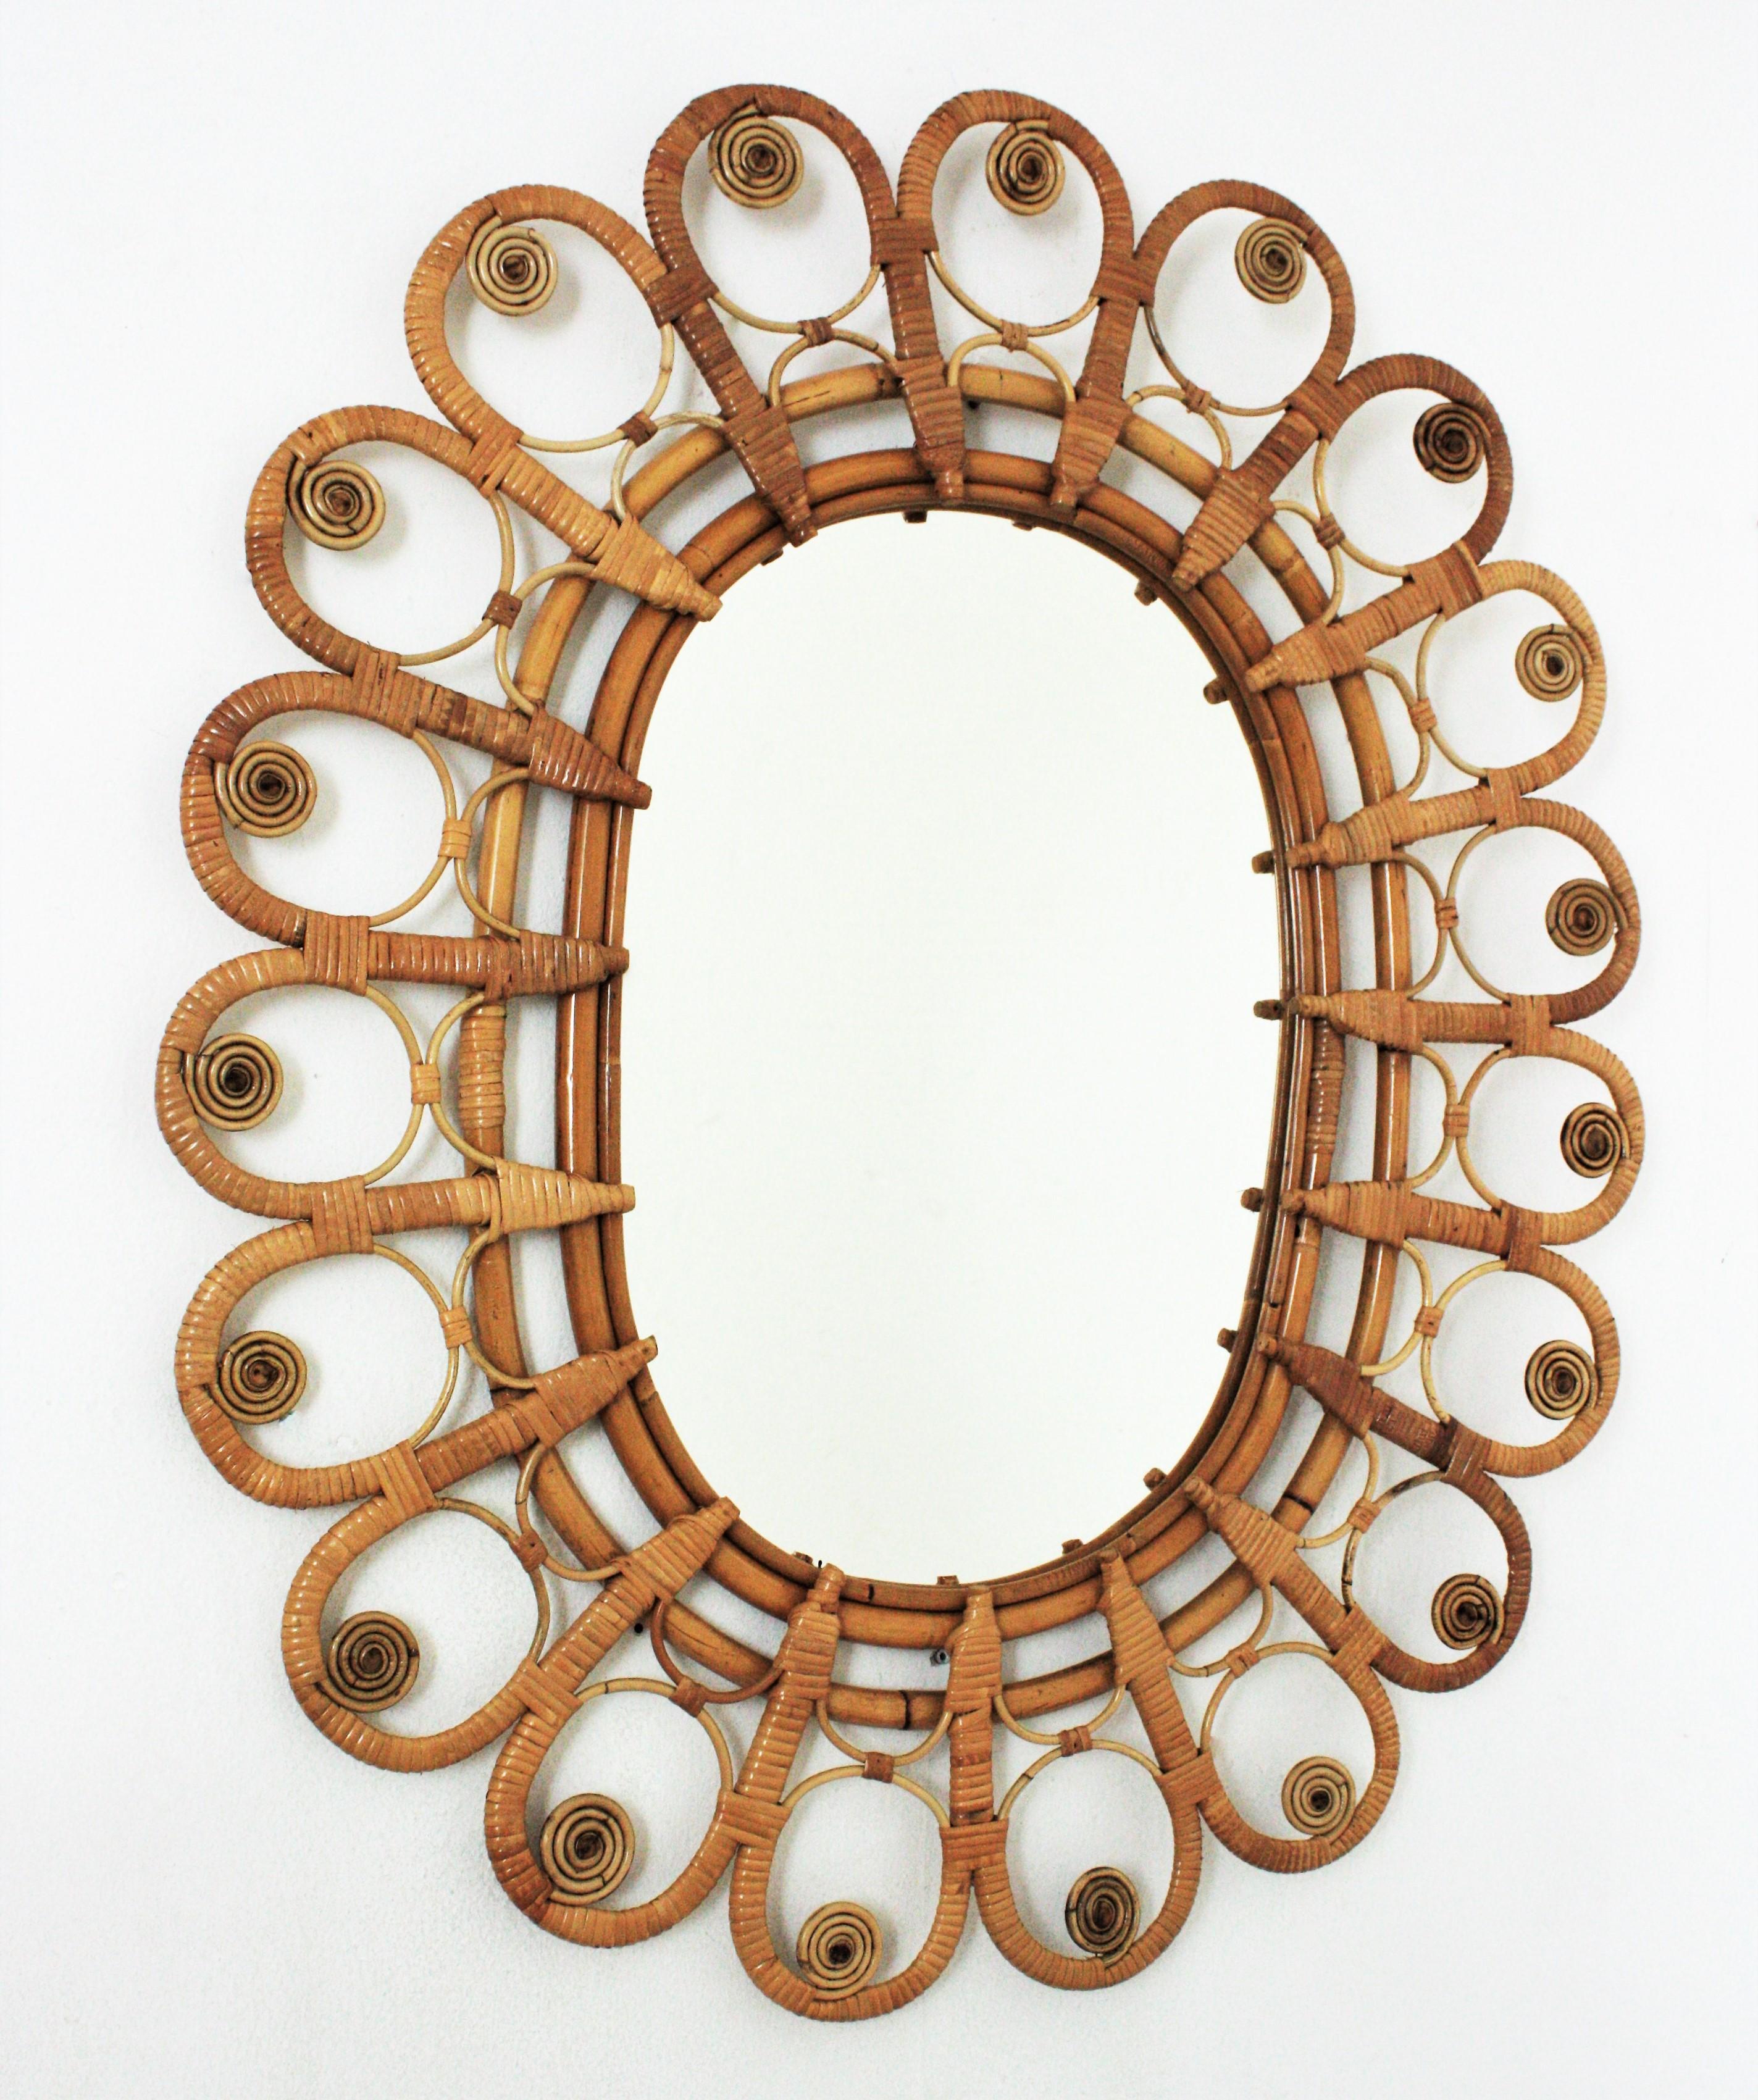 Large oval shaped handcrafted wicker and rattan mirror with a beautiful artistic filigree peacock frame, Spain, 1960s.
This mirror has all the taste of the Mediterranean and bohemian style and reminiscences of the design of the Peacock chairs.
All